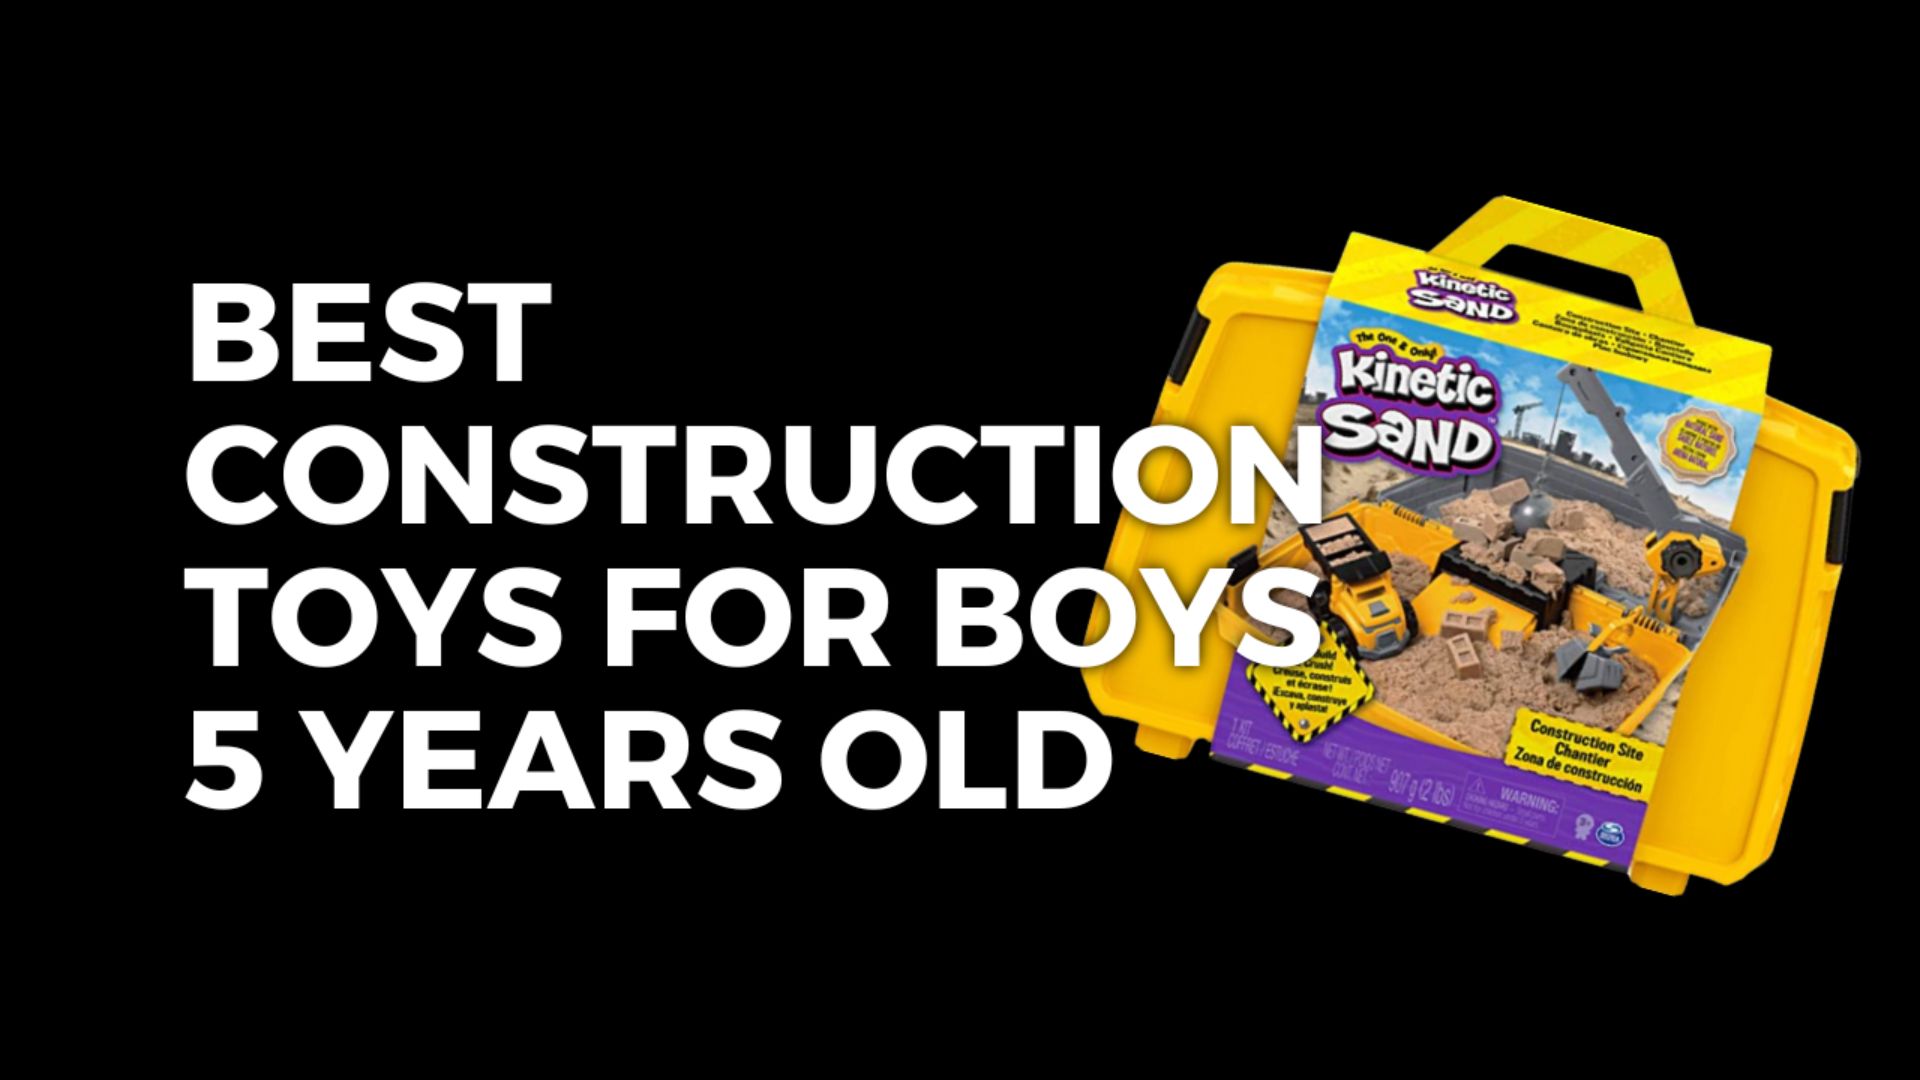 Best Construction Toys For Boys 5 Years Old (Top 2023)